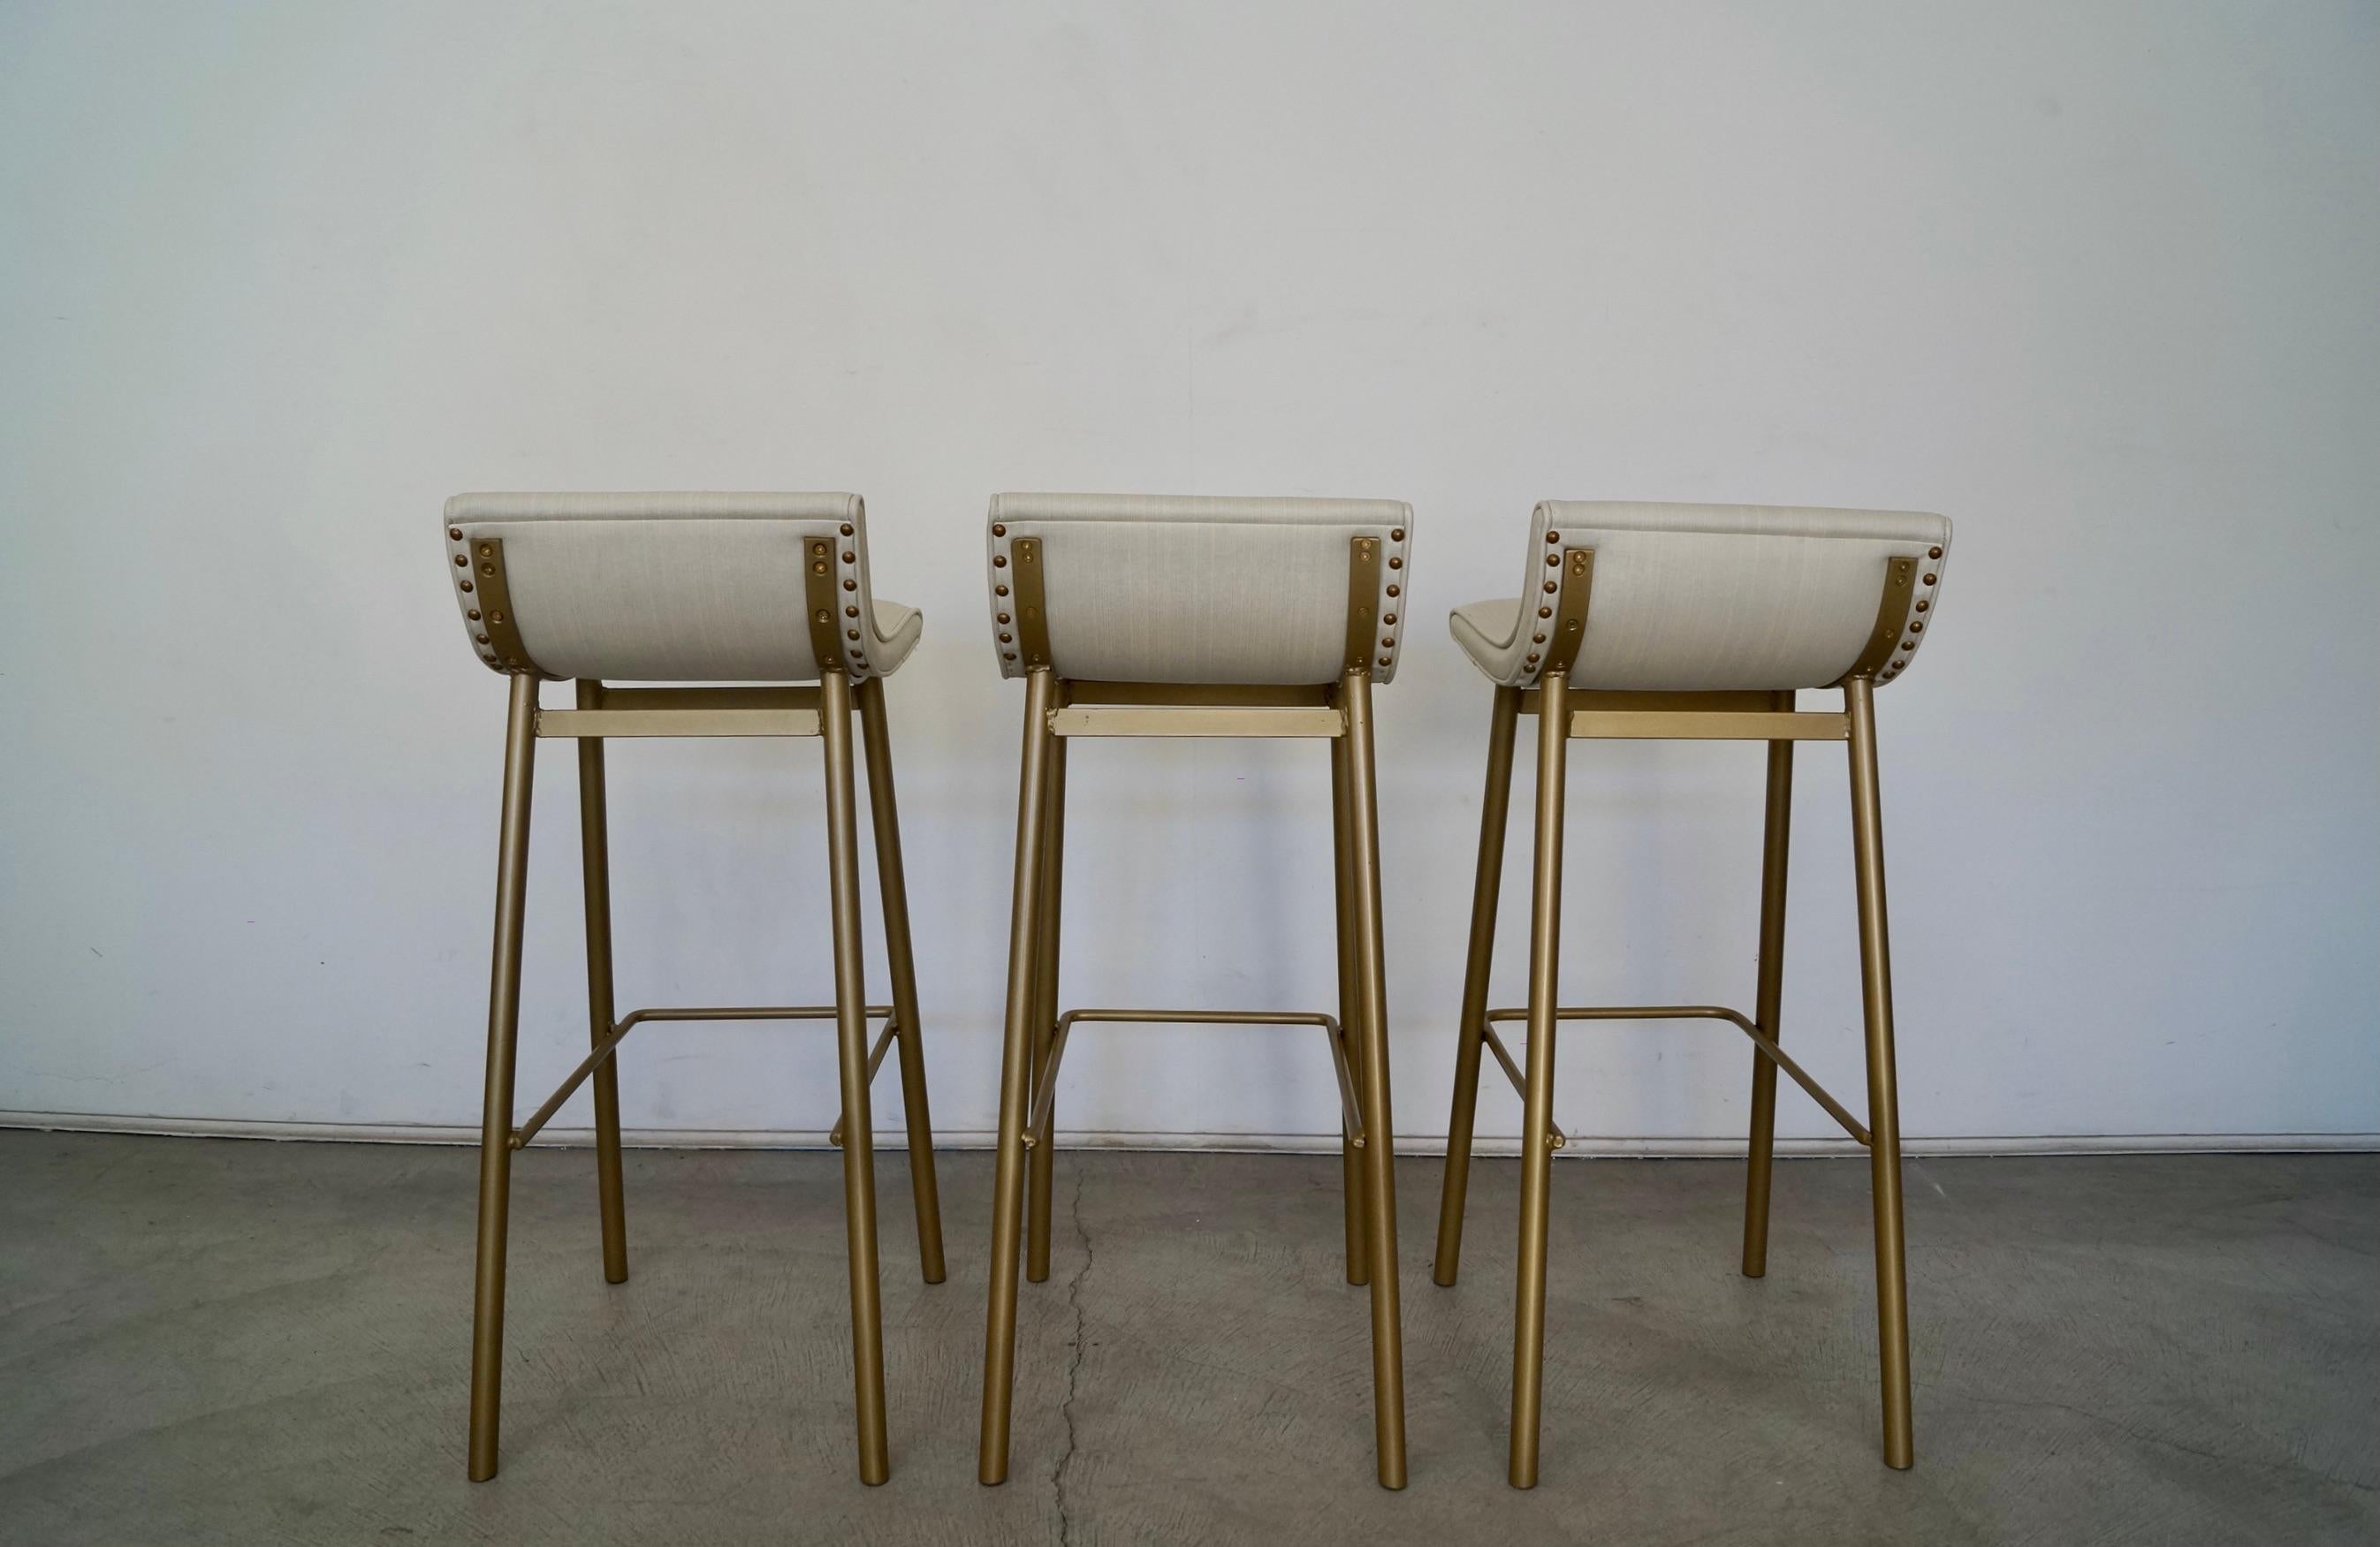 1950's Mid-Century Modern Bar Stools by Vista of California - Set of Three For Sale 3